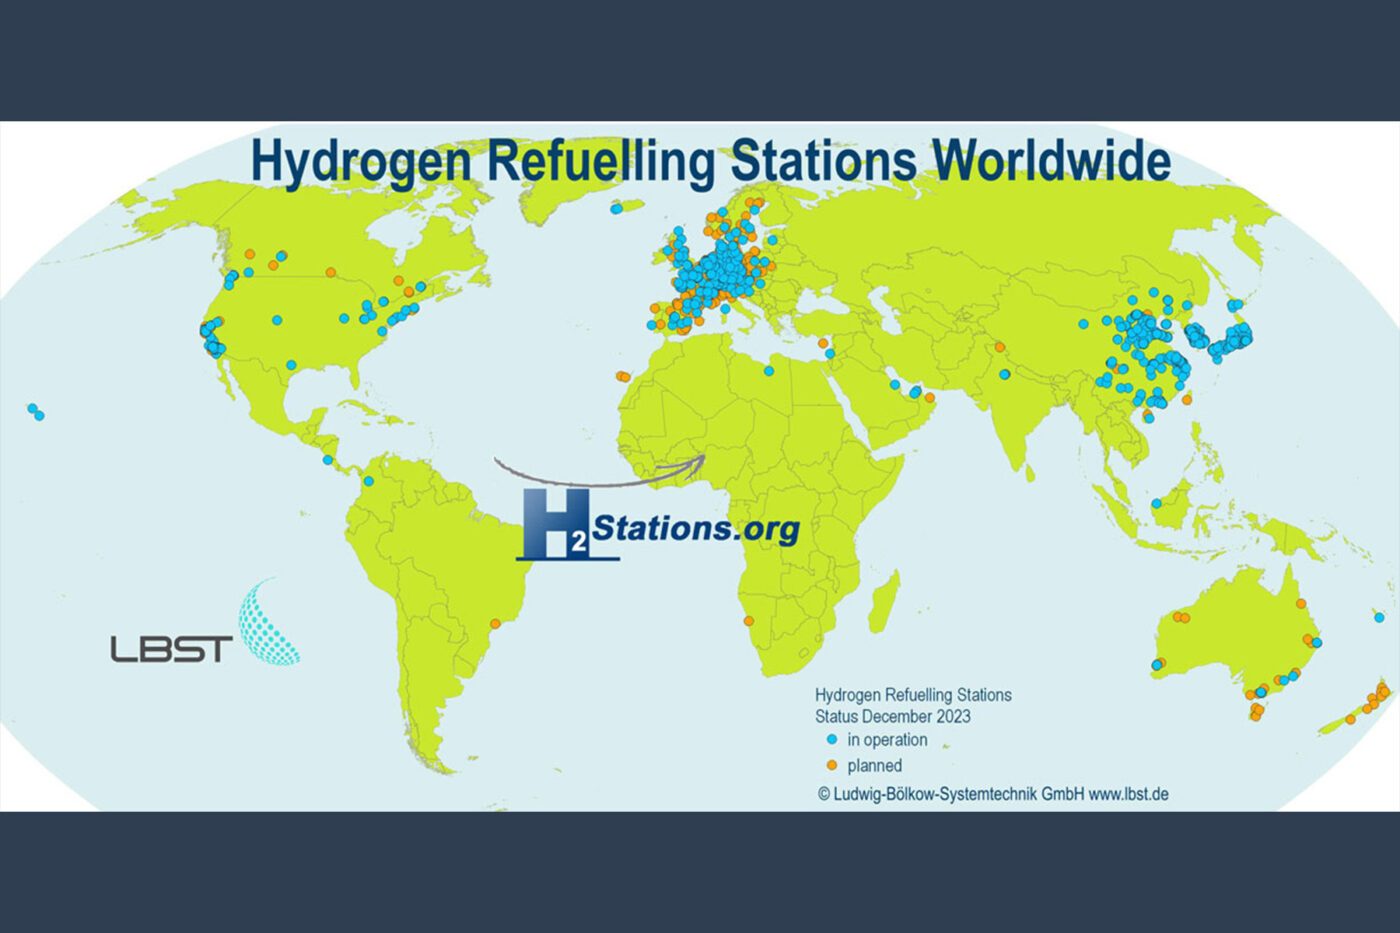 h2 stations global 2023 1400x933 1 - Global Hydrogen Refuelling Stations Reach 921, Reflecting Ongoing Expansion in 2023